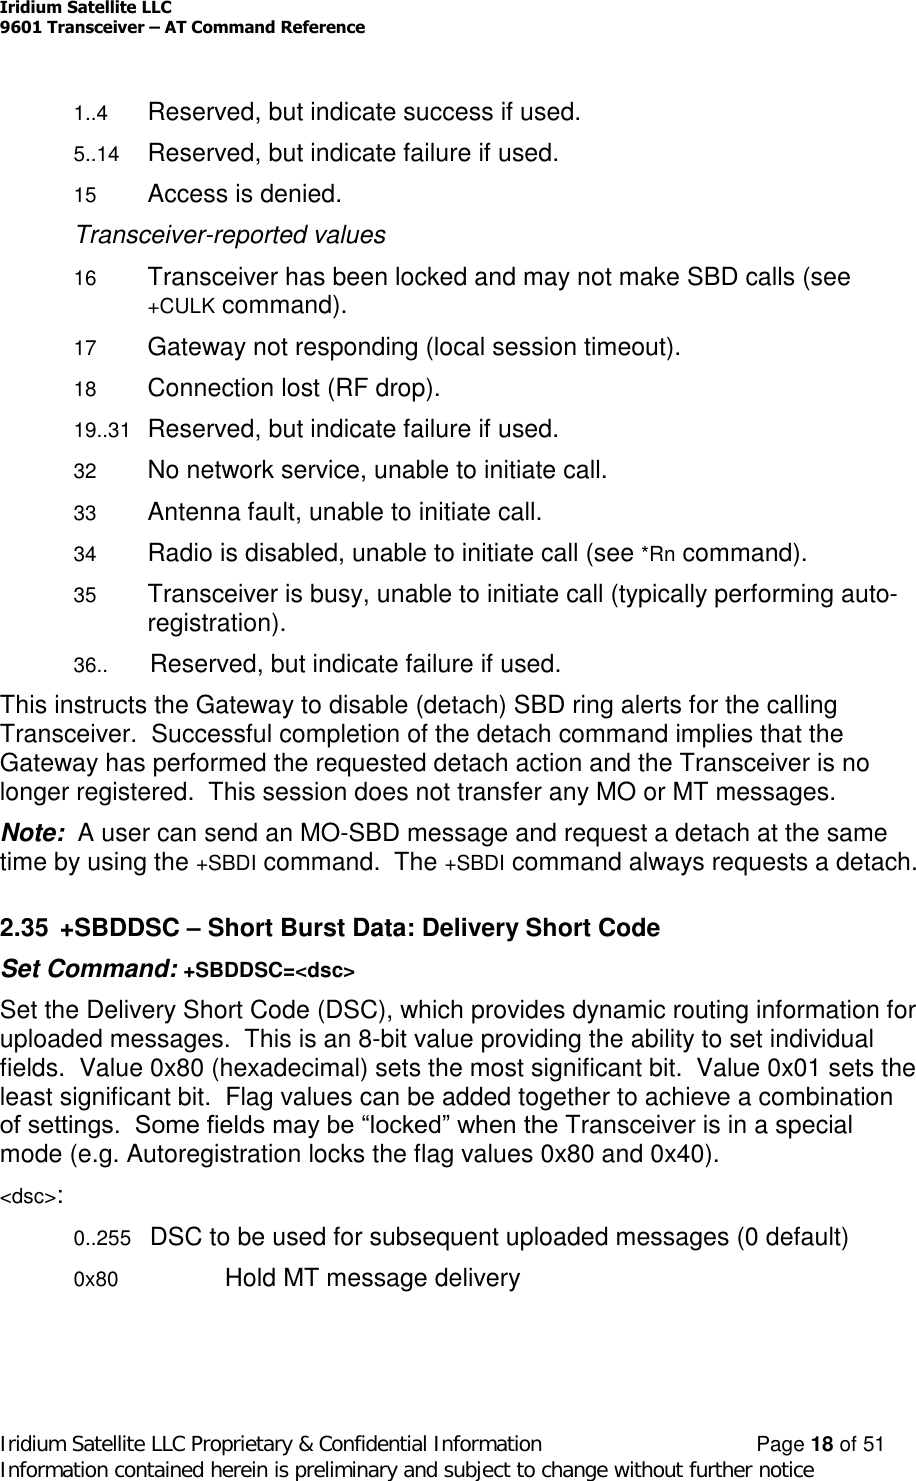 Iridium Satellite LLC9601 Transceiver –AT Command ReferenceIridium Satellite LLC Proprietary &amp; Confidential Information Page 18 of 51Information contained herein is preliminary and subject to change without further notice1..4 Reserved, but indicate success if used.5..14 Reserved, but indicate failure if used.15 Access is denied.Transceiver-reported values16 Transceiver has been locked and may not make SBD calls (see+CULK command).17 Gateway not responding (local session timeout).18 Connection lost (RF drop).19..31 Reserved, but indicate failure if used.32 No network service, unable to initiate call.33 Antenna fault, unable to initiate call.34 Radio is disabled, unable to initiate call (see *Rn command).35 Transceiver is busy, unable to initiate call (typically performing auto-registration).36.. Reserved, but indicate failure if used.This instructs the Gateway to disable (detach) SBD ring alerts for the callingTransceiver. Successful completion of the detach command implies that theGateway has performed the requested detach action and the Transceiver is nolonger registered. This session does not transfer any MO or MT messages.Note: A user can send an MO-SBD message and request a detach at the sametime by using the +SBDI command. The +SBDI command always requests a detach.2.35 +SBDDSC –Short Burst Data: Delivery Short CodeSet Command: +SBDDSC=&lt;dsc&gt;Set the Delivery Short Code (DSC), which provides dynamic routing information foruploaded messages. This is an 8-bit value providing the ability to set individualfields. Value 0x80 (hexadecimal) sets the most significant bit. Value 0x01 sets theleast significant bit. Flag values can be added together to achieve a combinationof settings.  Some fields may be “locked” when the Transceiver is in a specialmode (e.g. Autoregistration locks the flag values 0x80 and 0x40).&lt;dsc&gt;:0..255 DSC to be used for subsequent uploaded messages (0 default)0x80 Hold MT message delivery